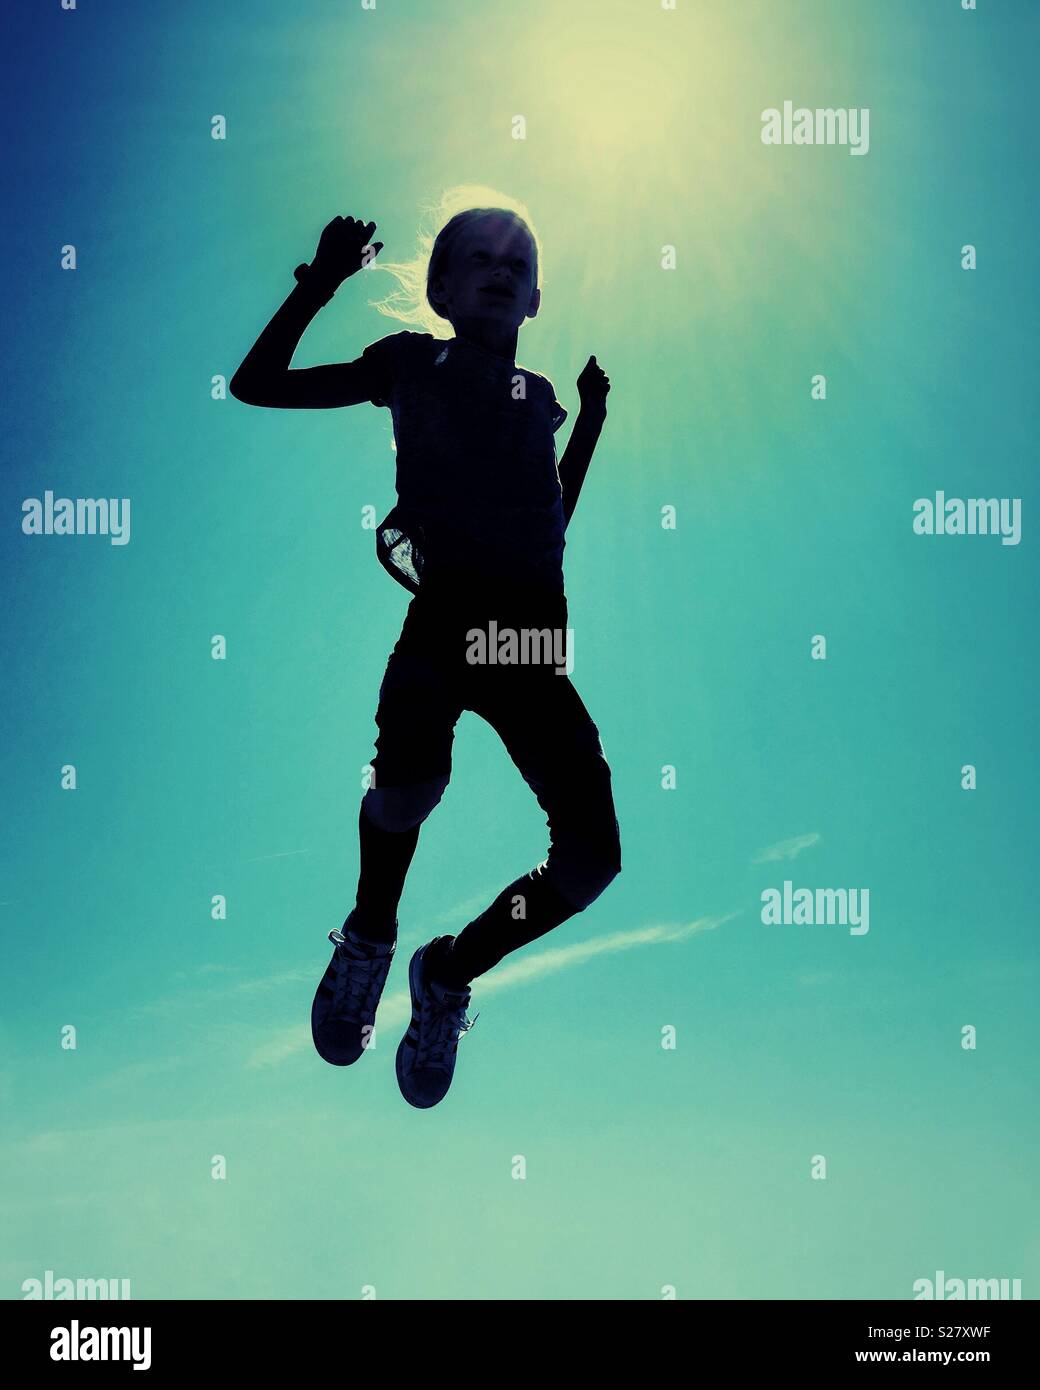 Girl jumping in silhouette against the sun and sky with grunge filter treatment Stock Photo